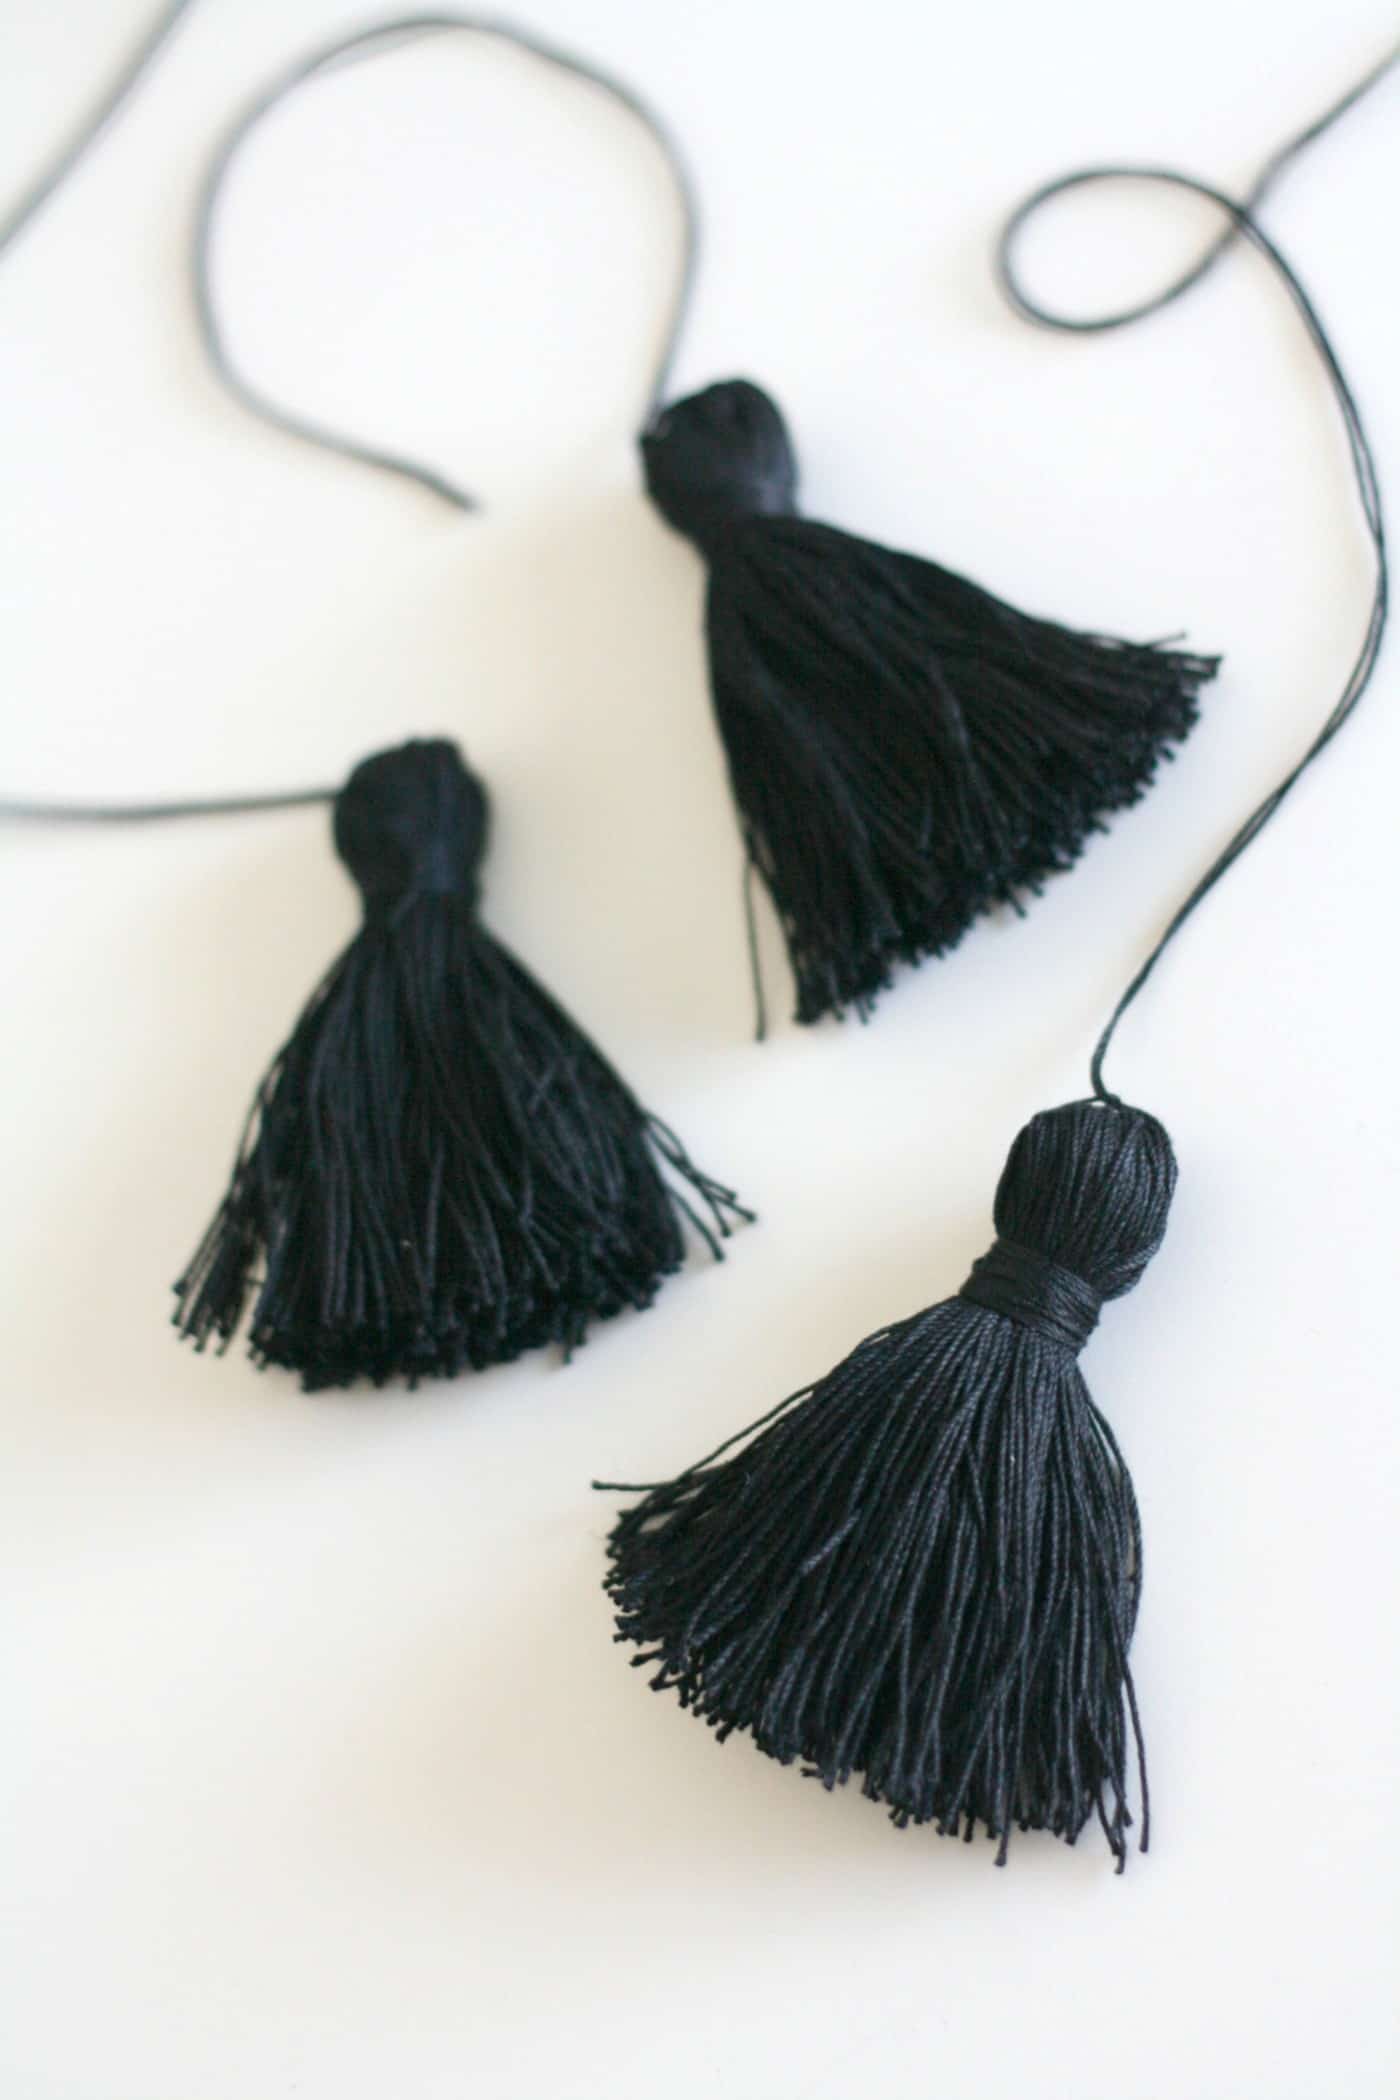 Three black tassels made with embroidery floss